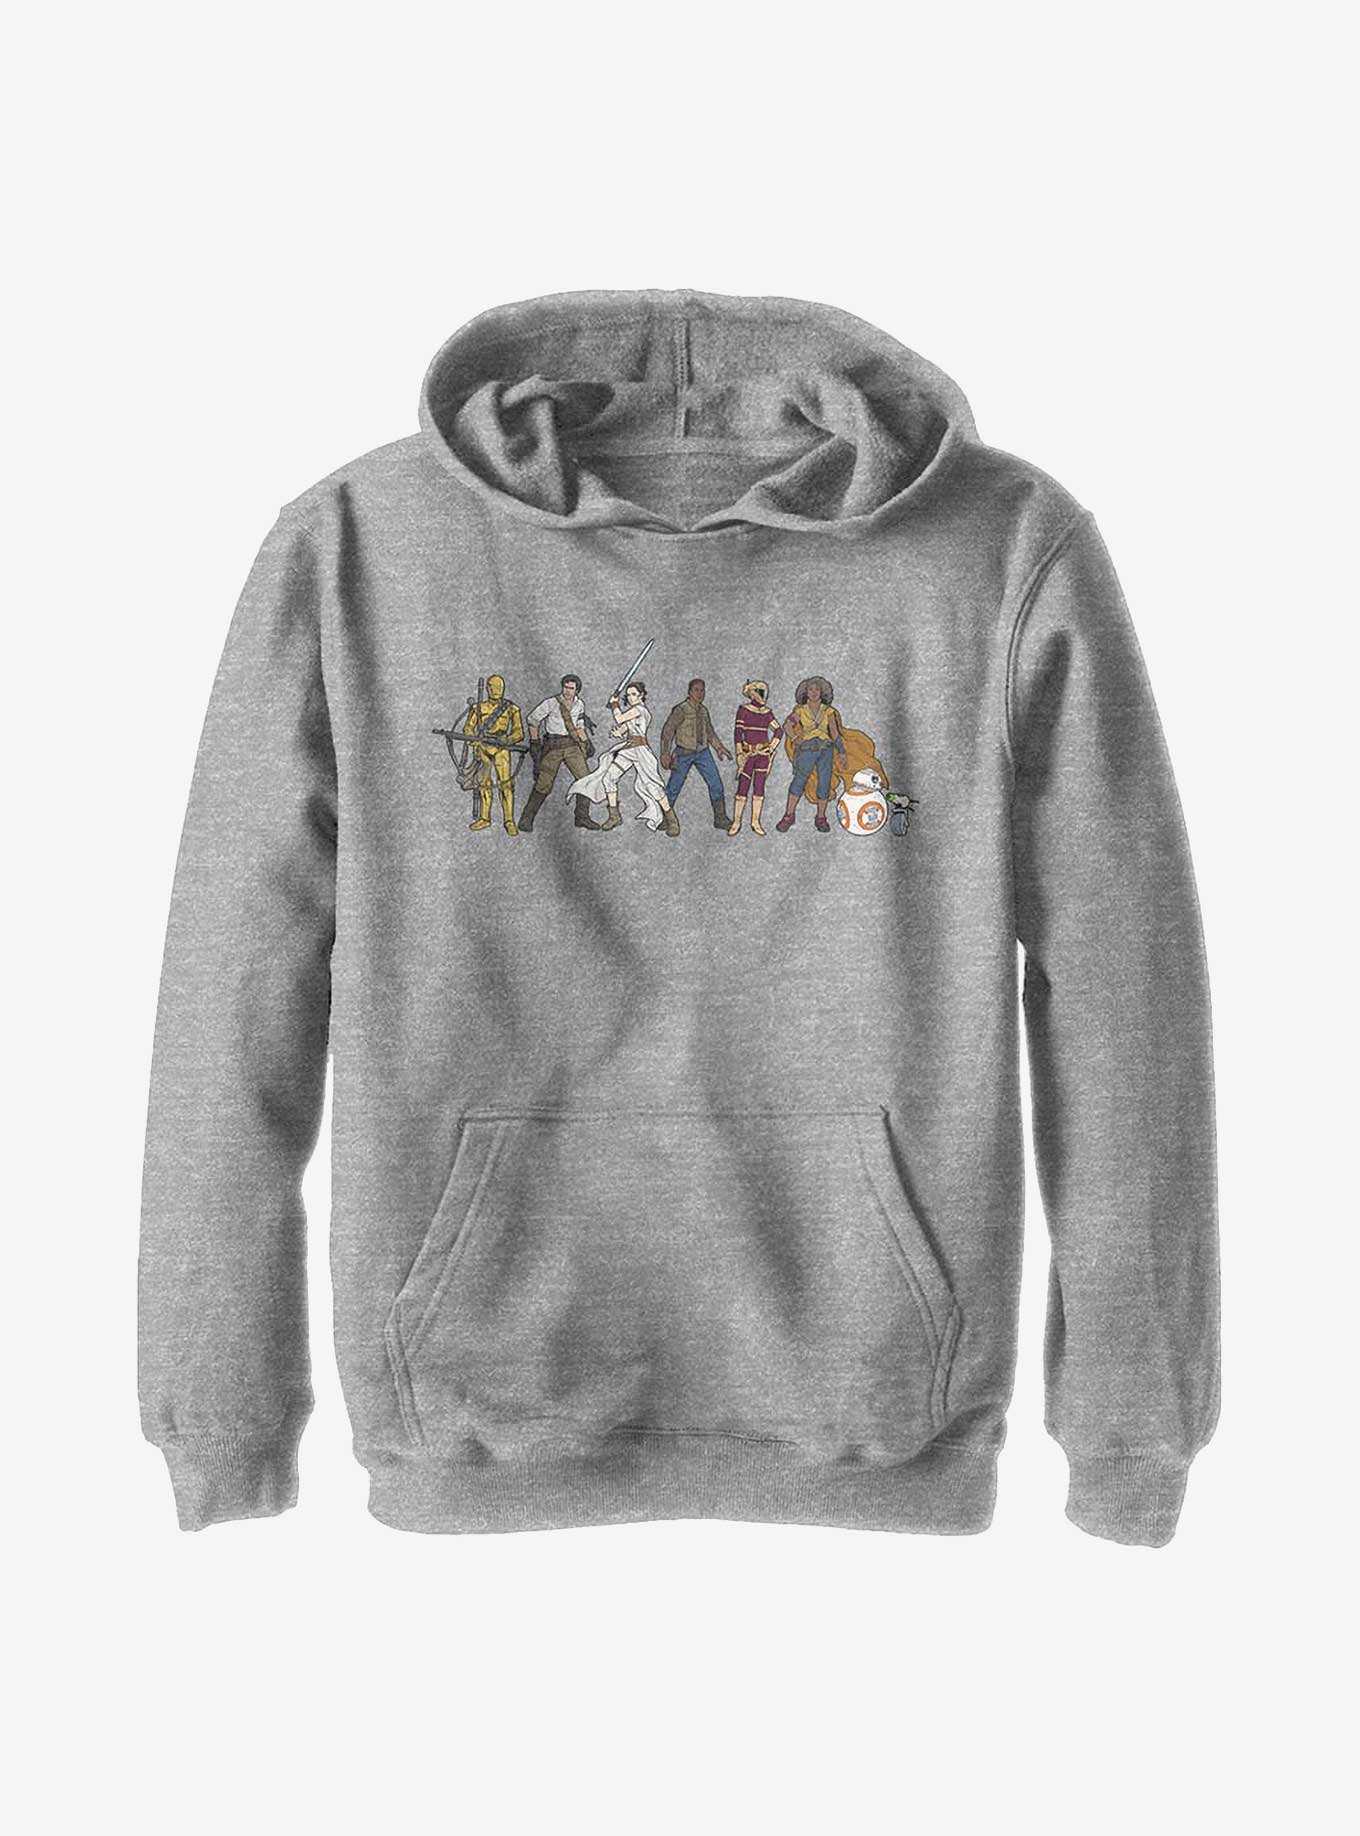 Star Wars Episode IX: The Rise Of Skywalker Resistance Lineup Youth Hoodie, , hi-res